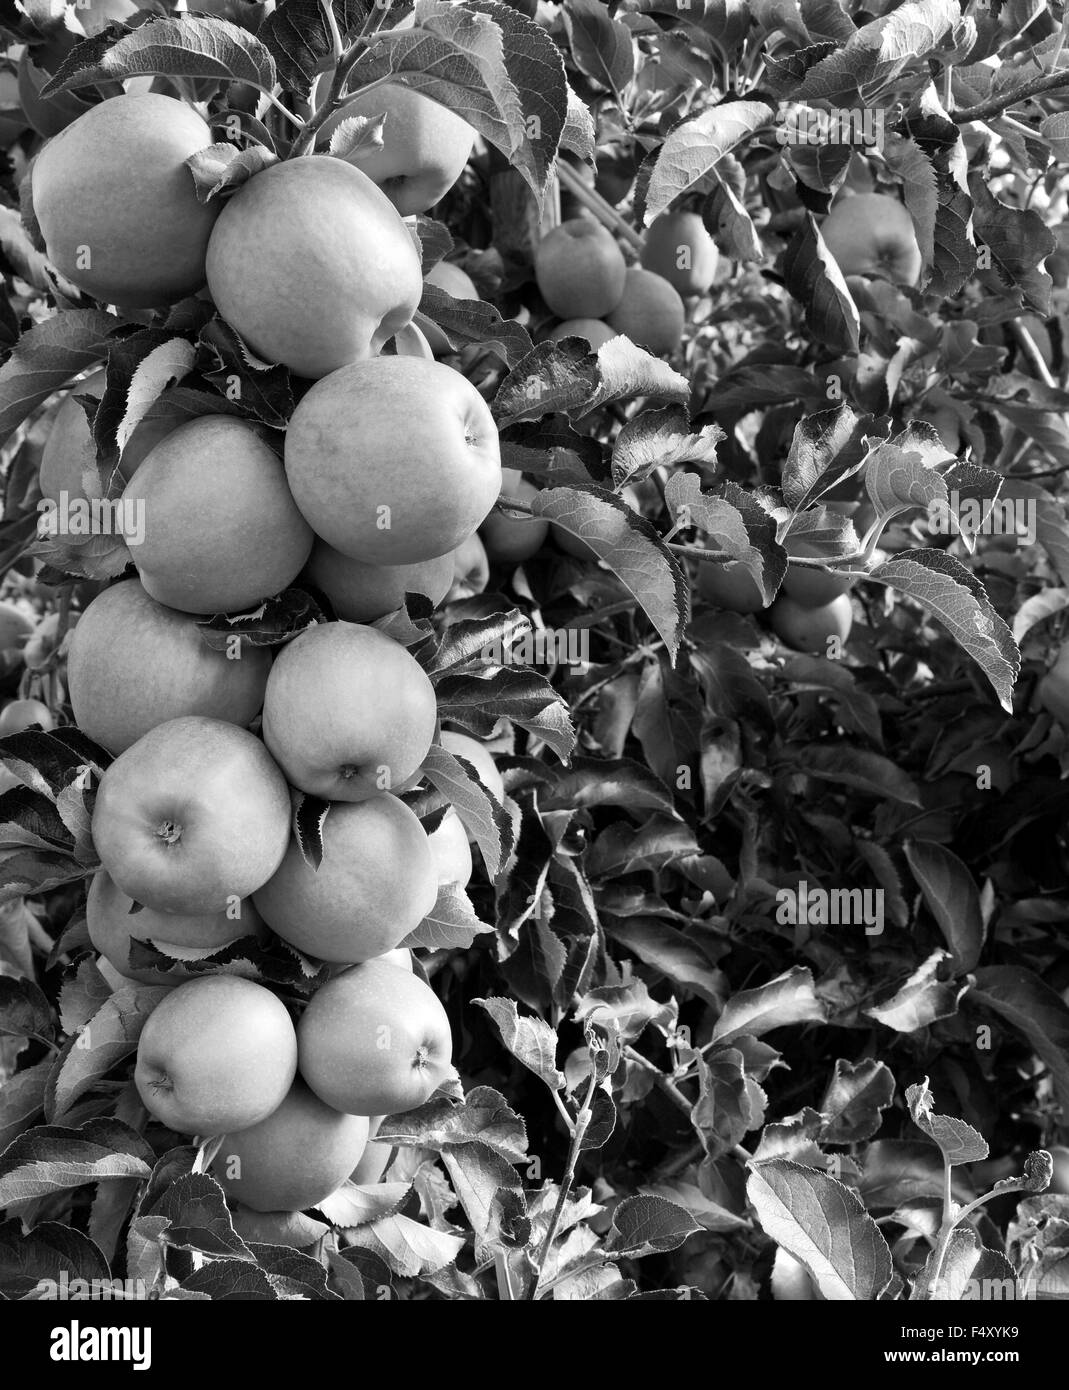 A bough full of apples hangs ready to be picked from the tree - monochrome processing Stock Photo